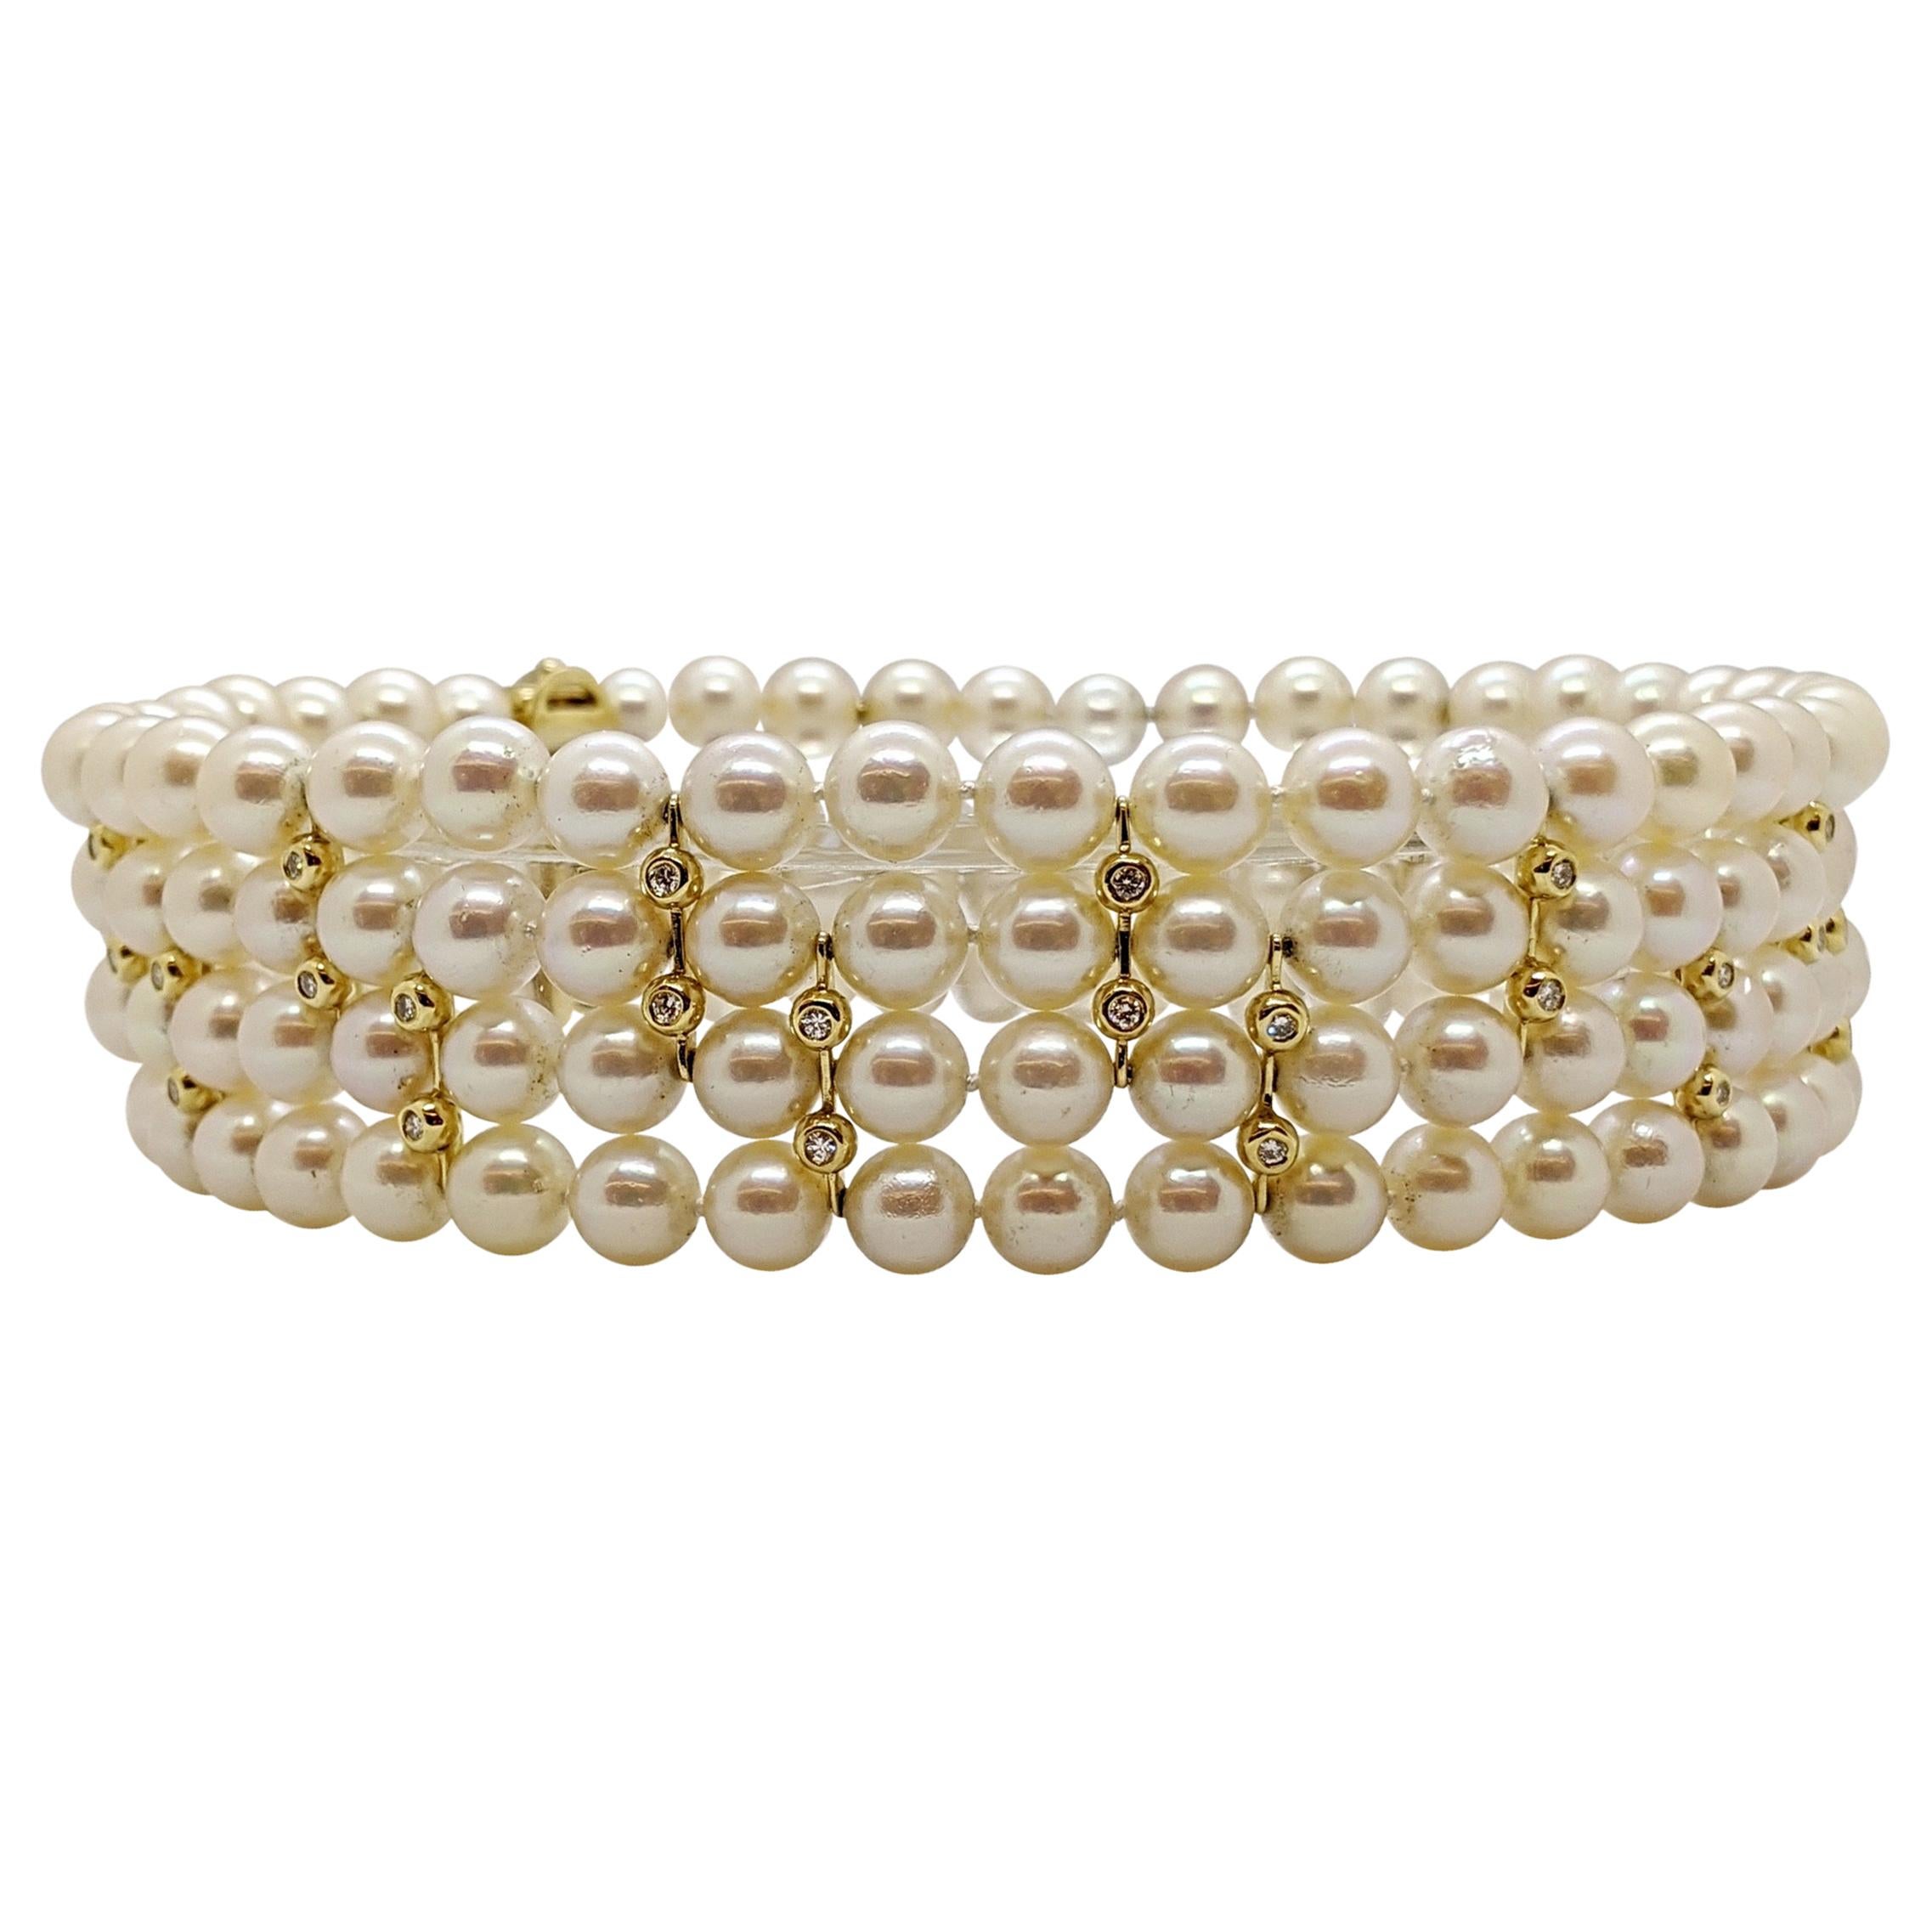 4 Strand AAA Japanese Cultured Pearl Choker with 18 Karat Gold and Diamonds